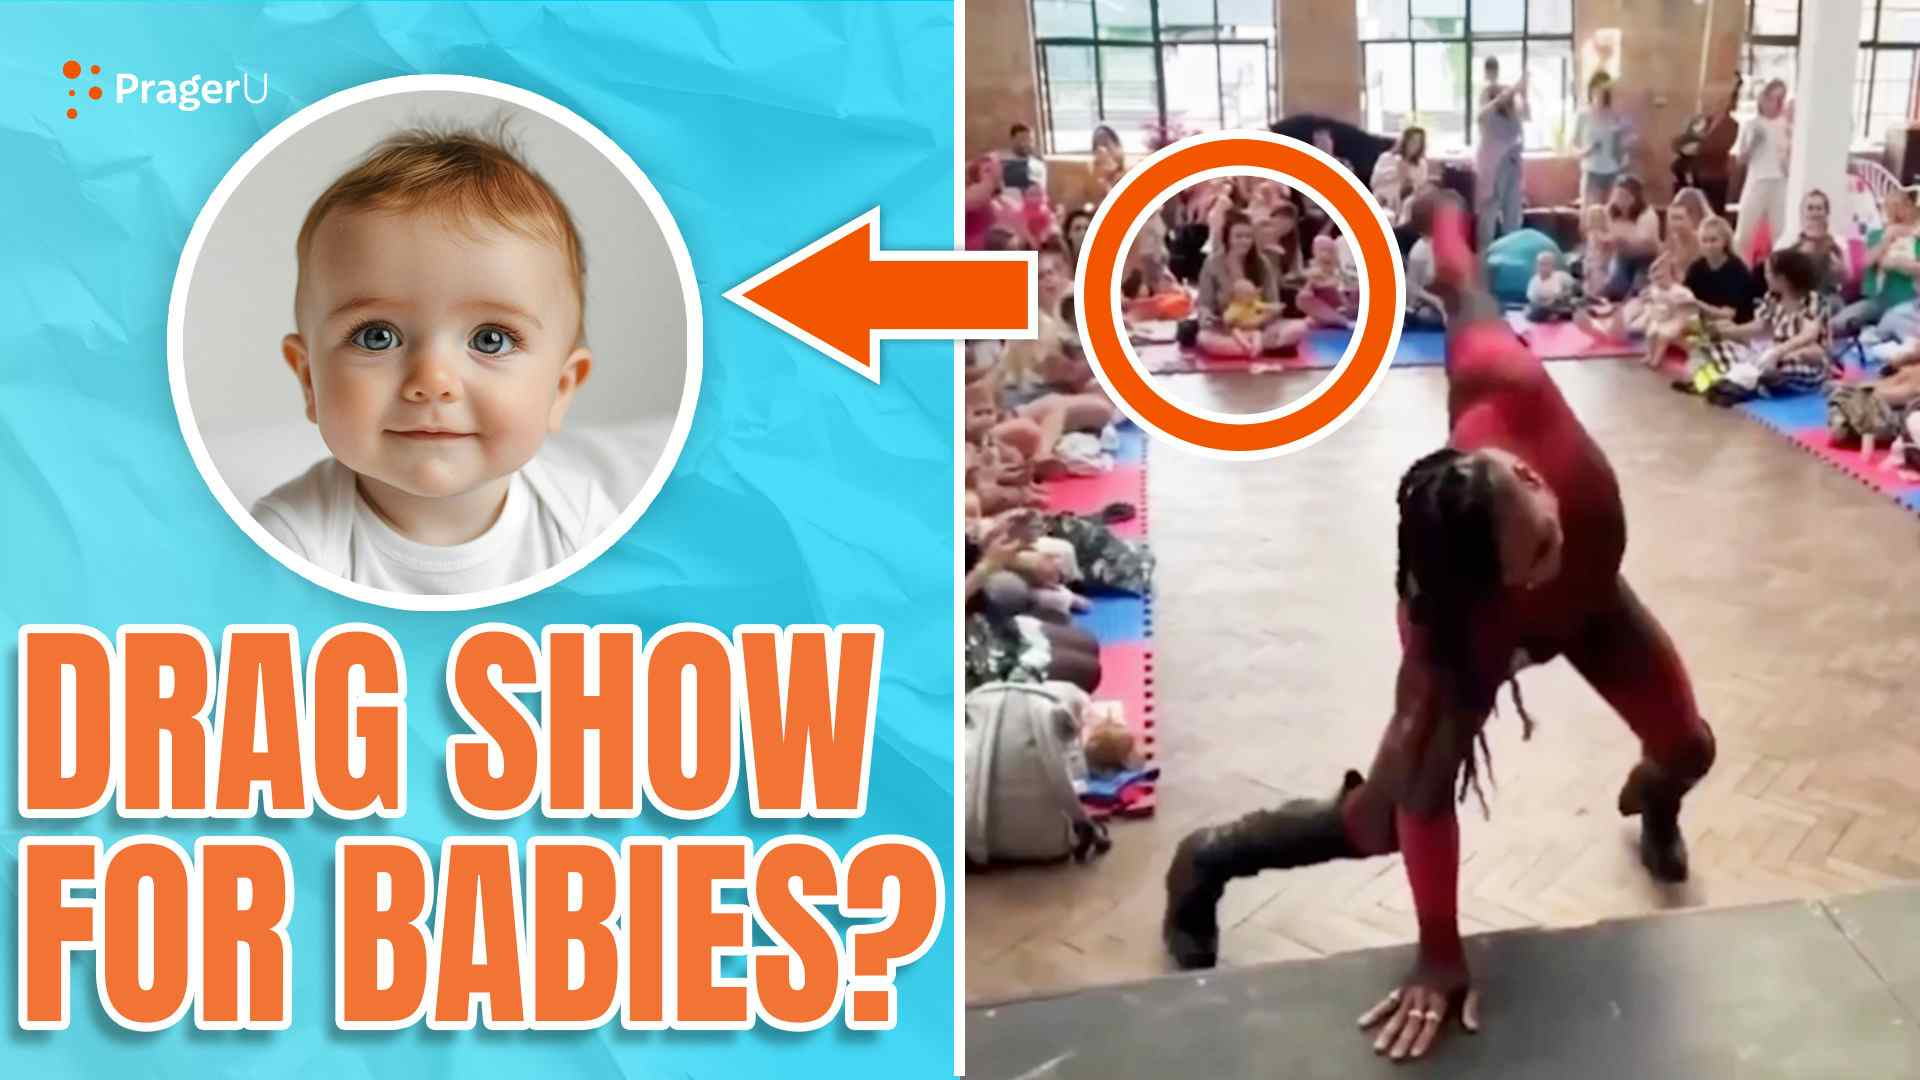 Drag Show for Babies?!